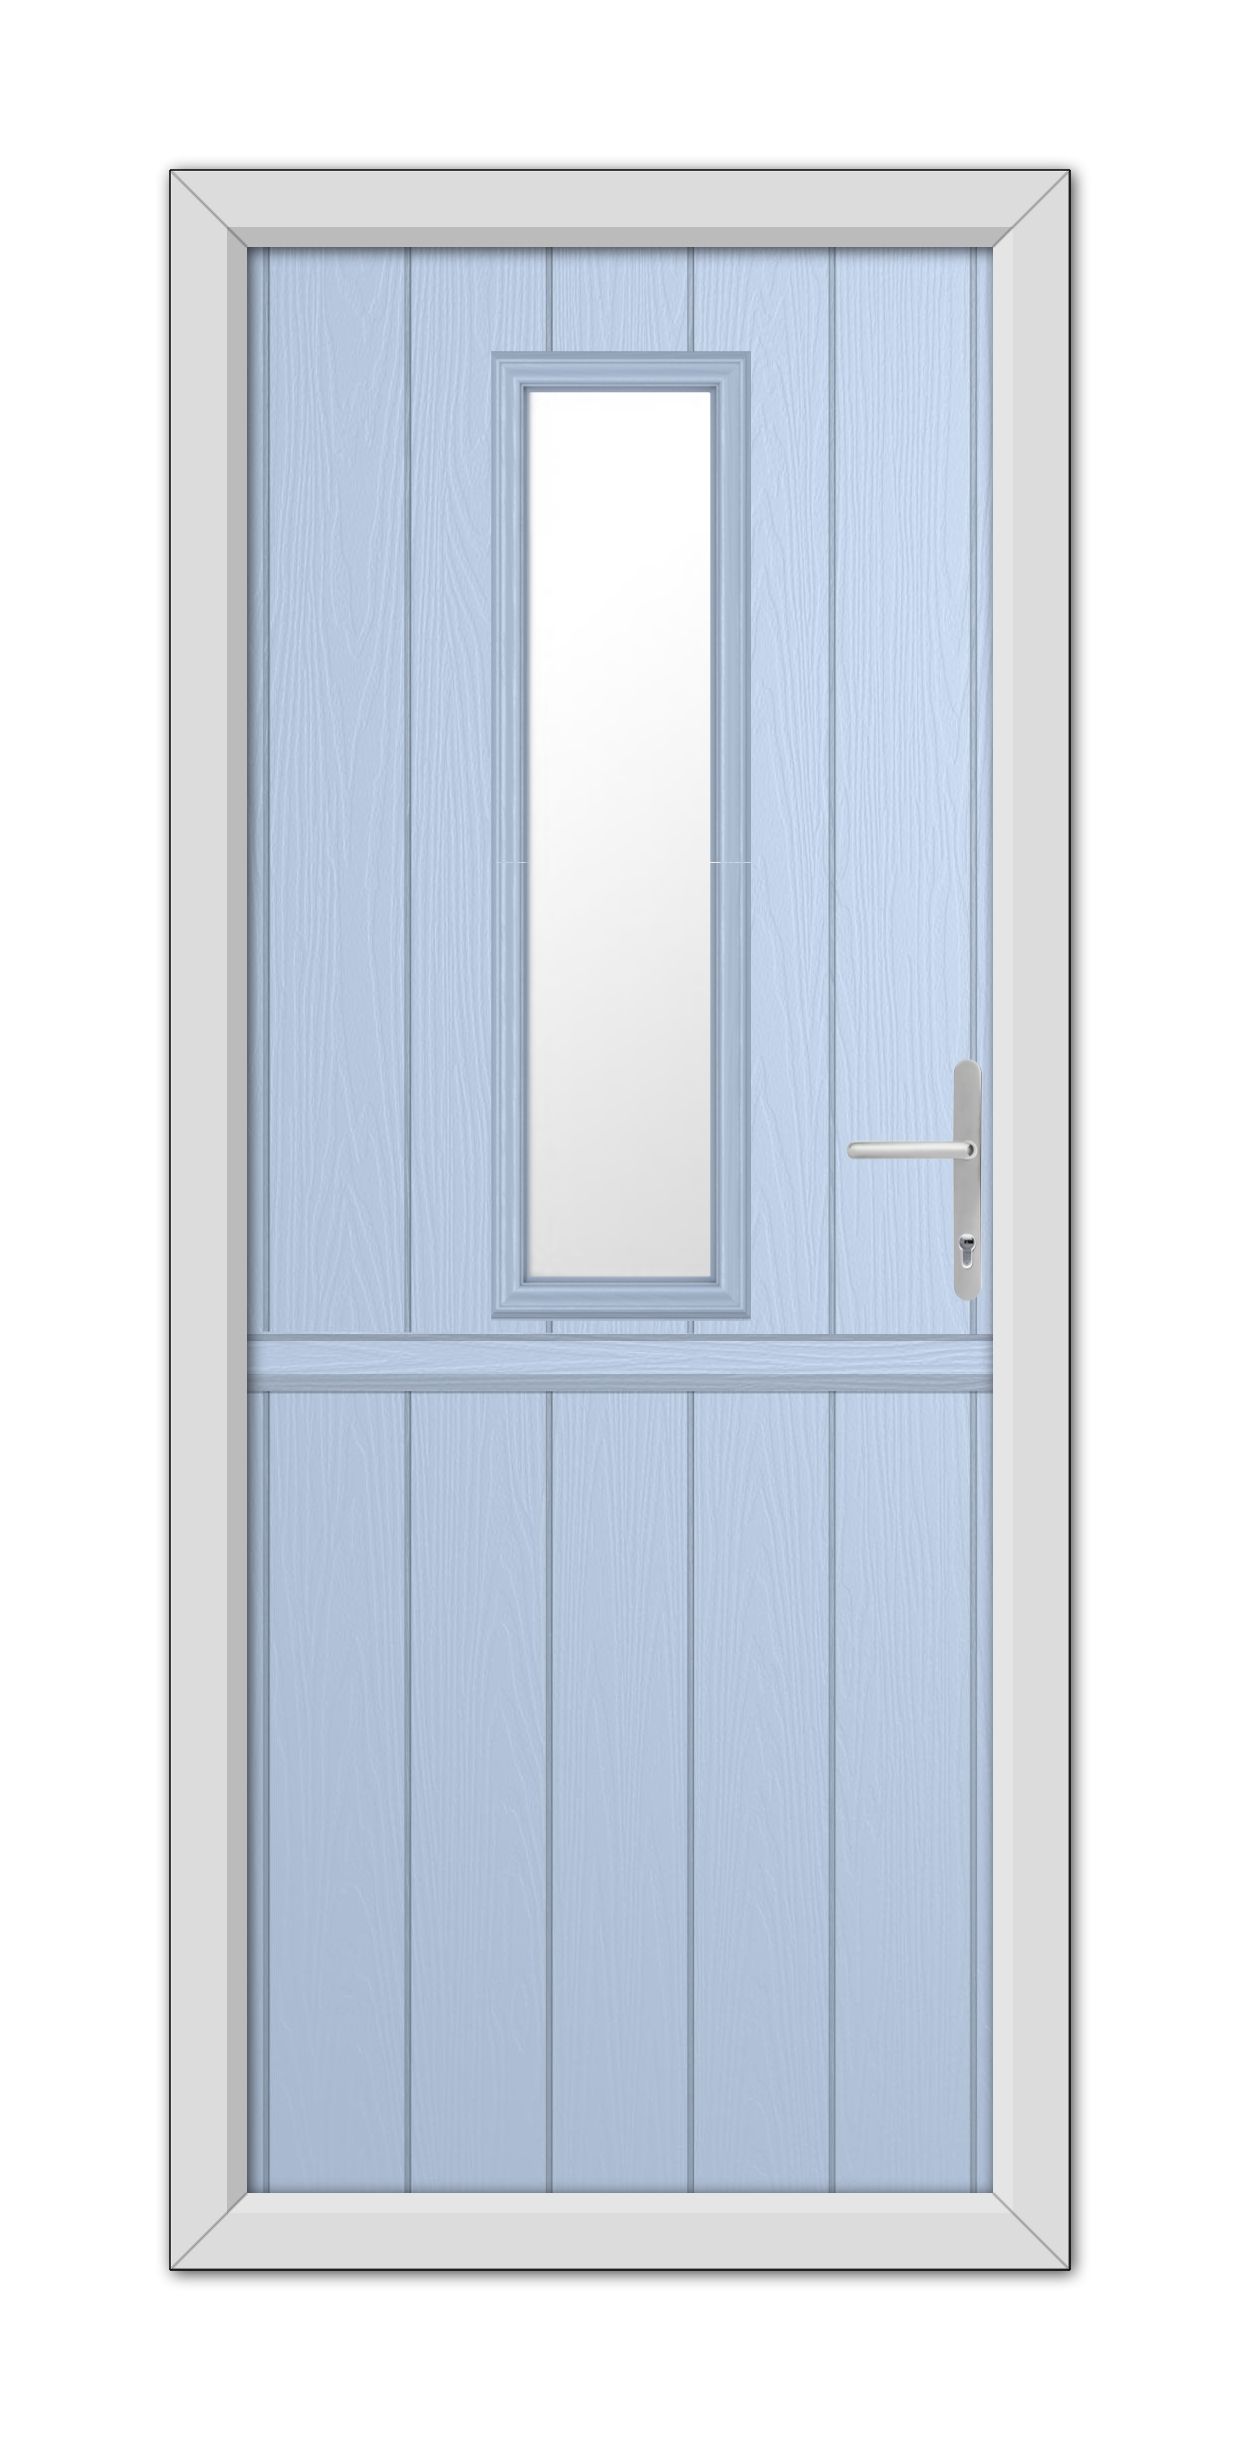 A Duck Egg Blue Mowbray Stable Composite Door 48mm Timber Core with a vertical rectangular window in the upper half, featuring a chrome door handle on the right side.